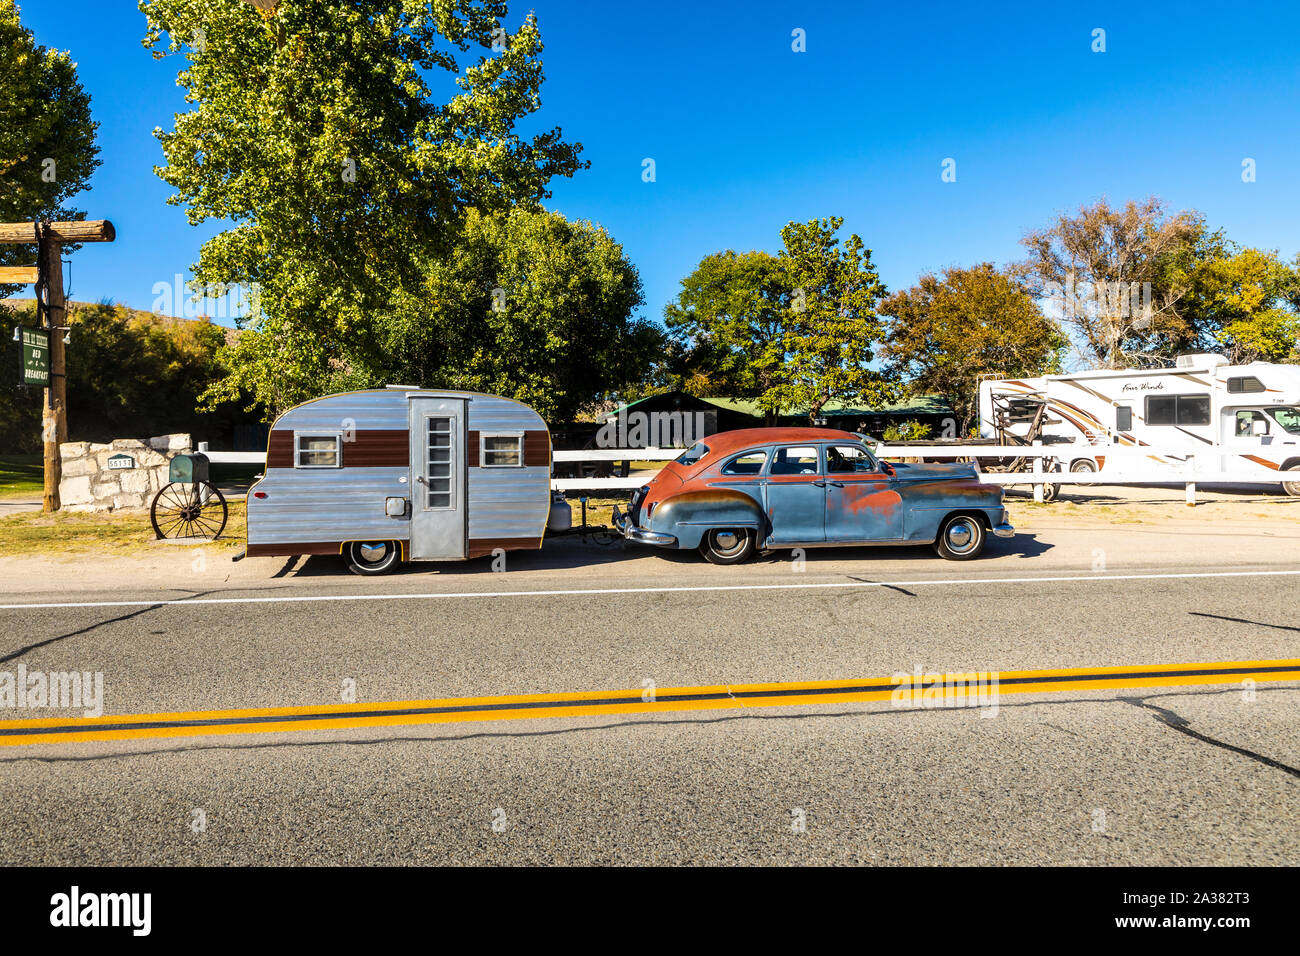 A 1946 DeSoto car and a vintage travel trailer in Benton Hot Springs in remote eastern California Stock Photo